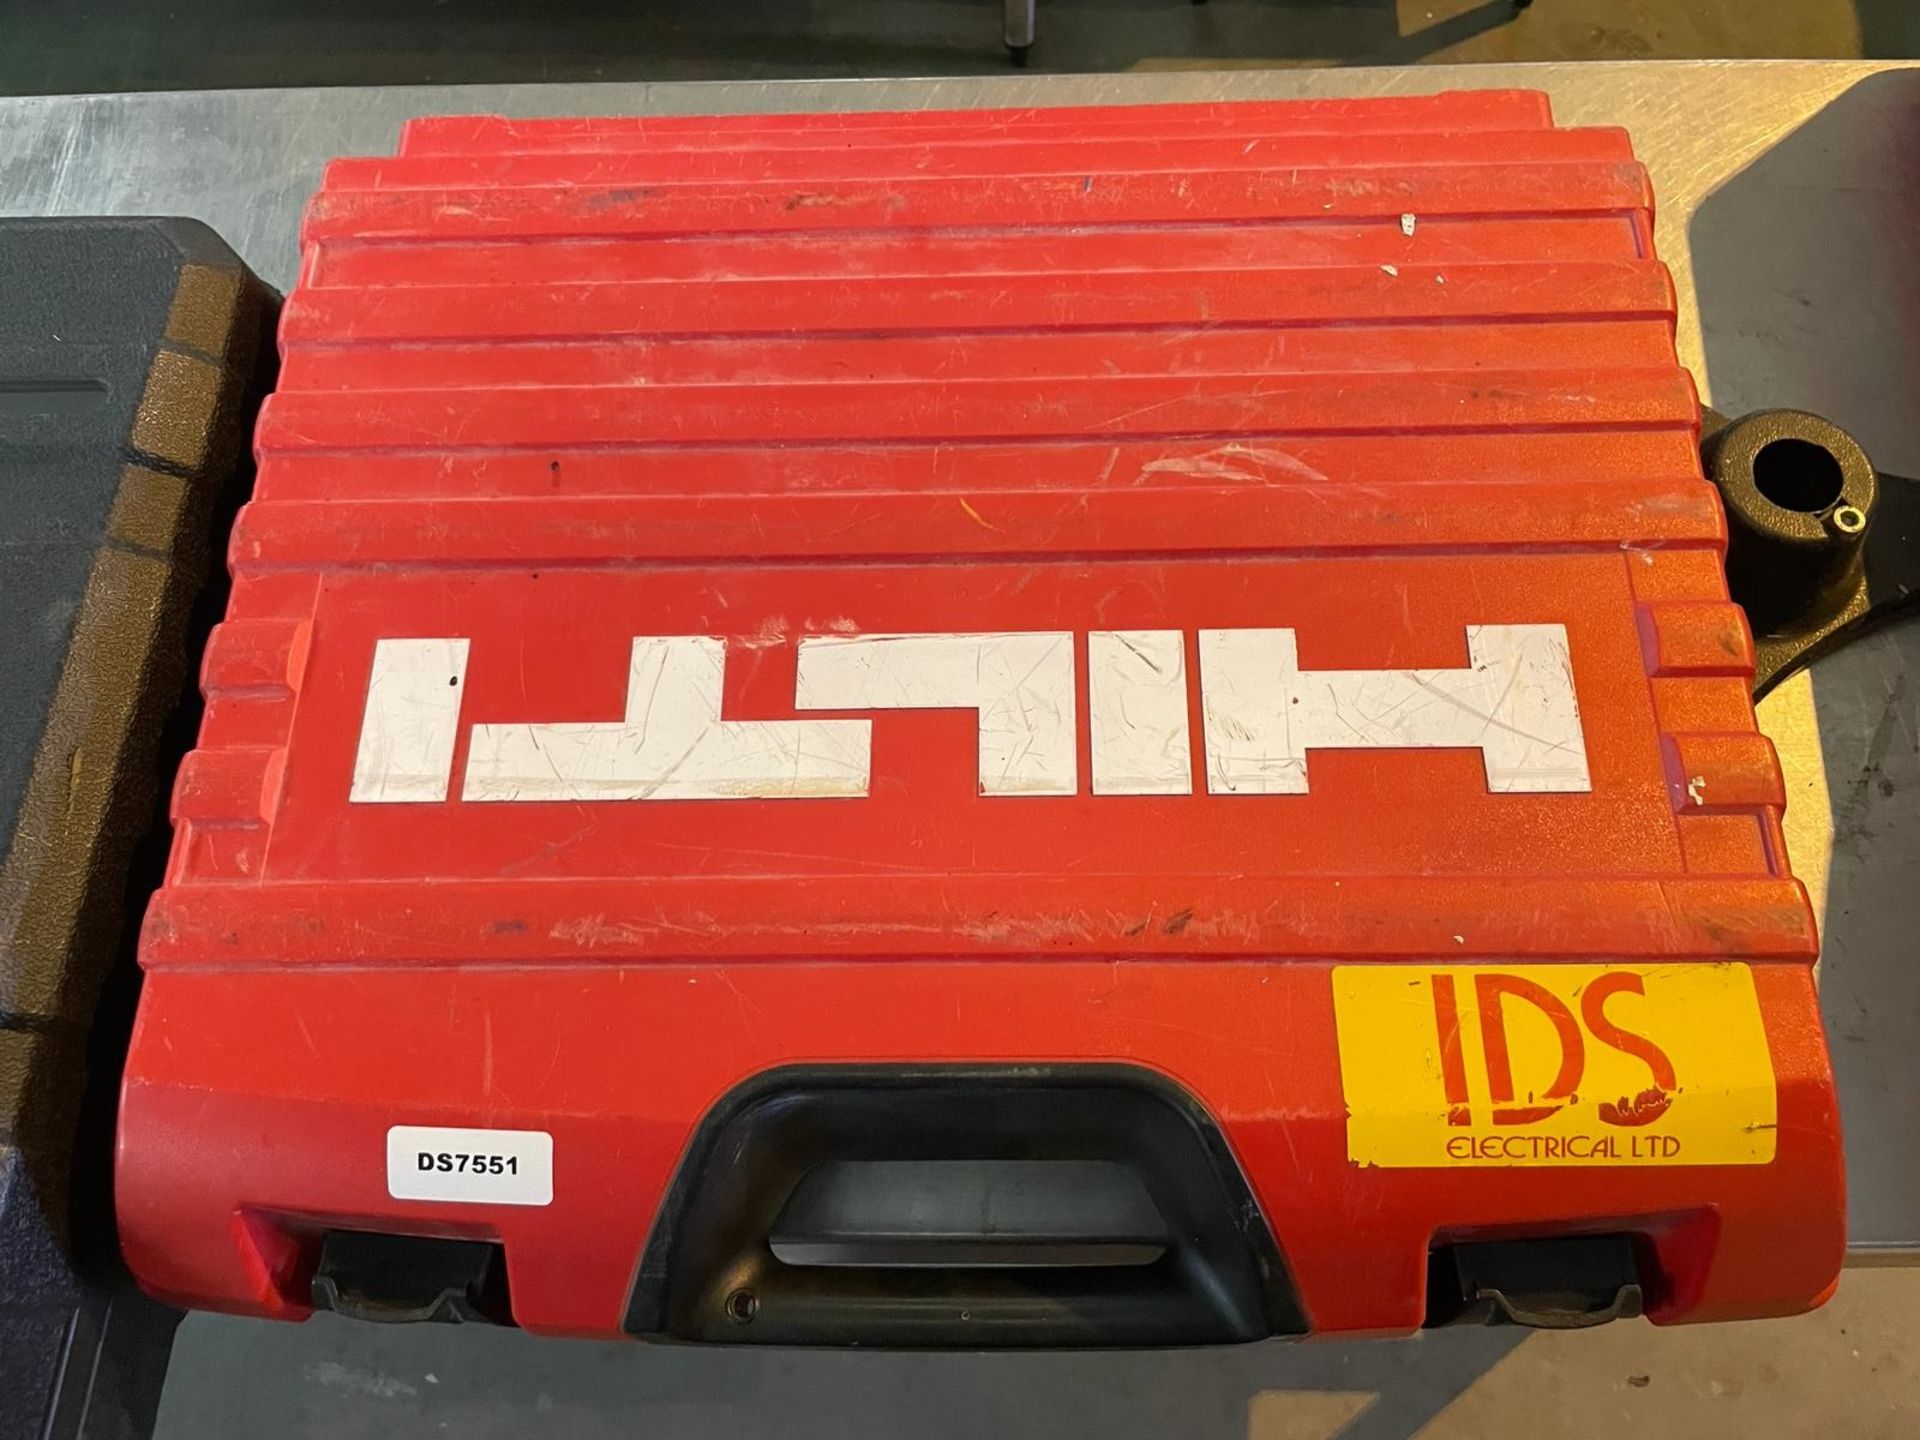 1 x Hilti BX3 Cordless Nail Gun Fastening Tool - Includes Case, Battery and Charger - RRP £3,400 - Bild 7 aus 7